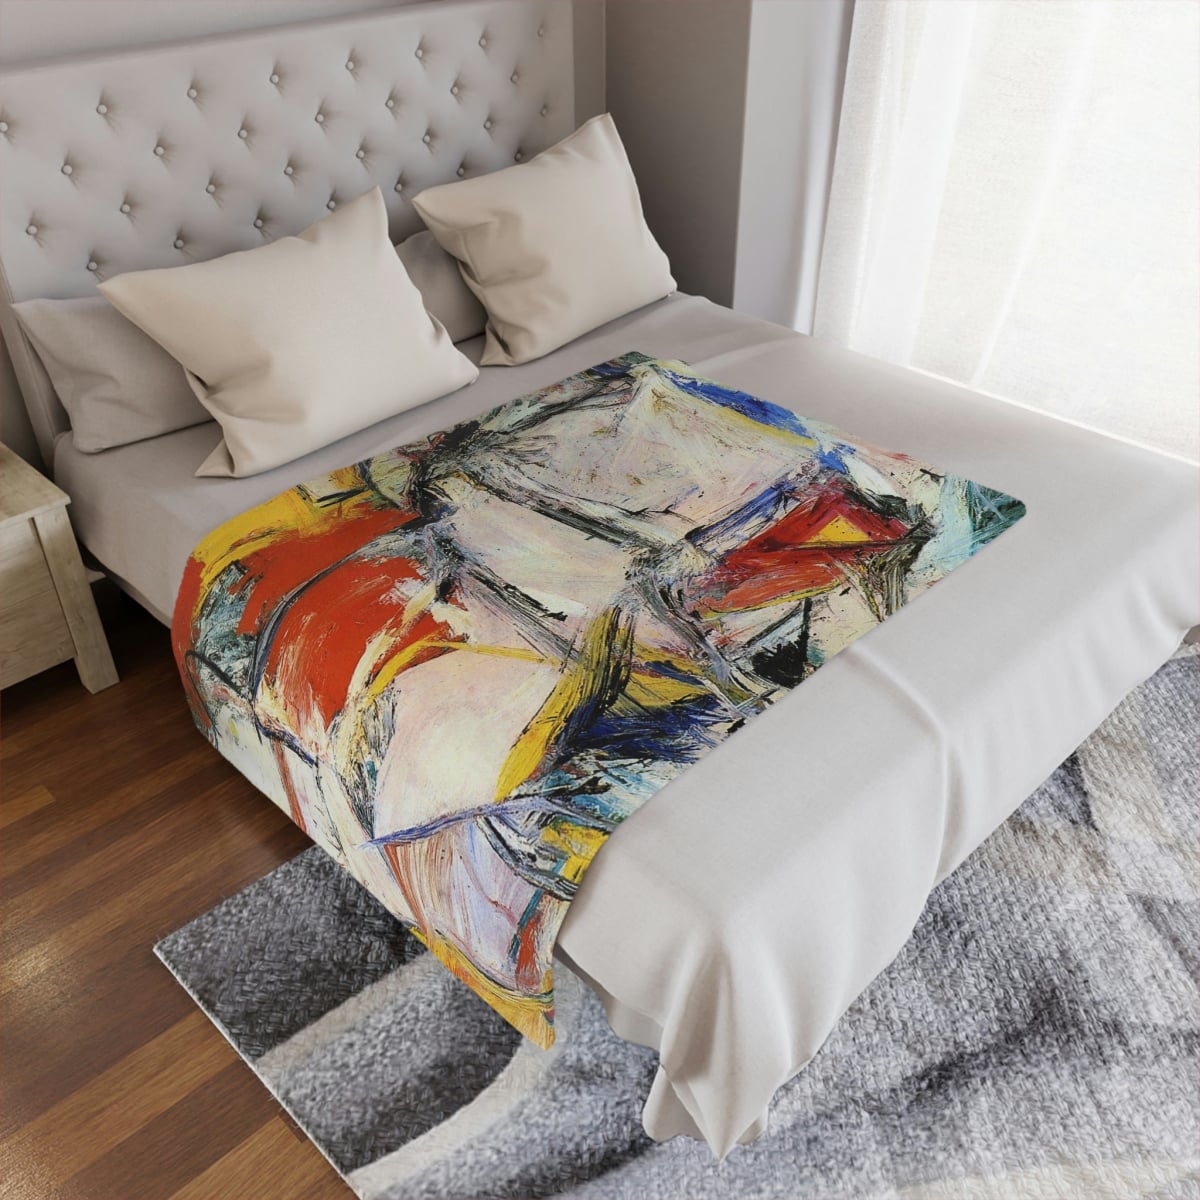 Artist-Inspired Blanket - Stylish and Artistic Home Decor